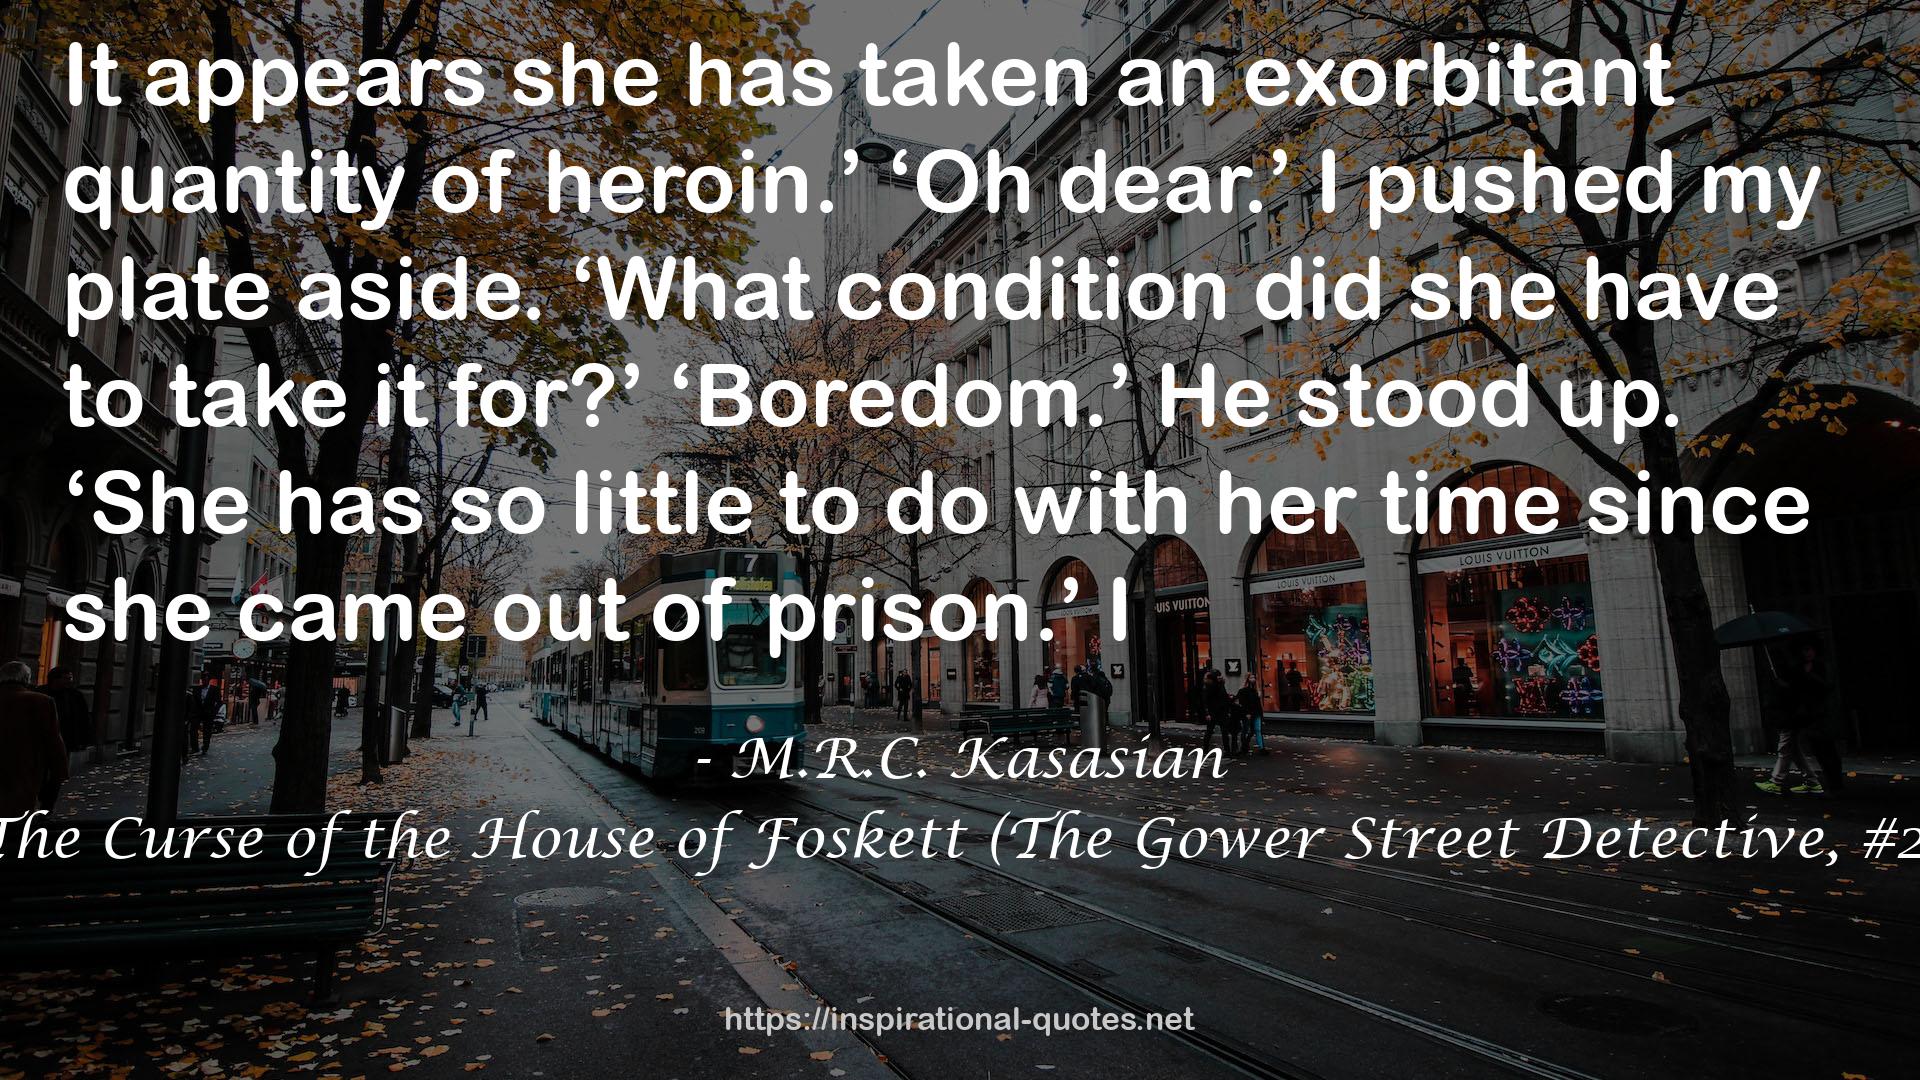 The Curse of the House of Foskett (The Gower Street Detective, #2) QUOTES